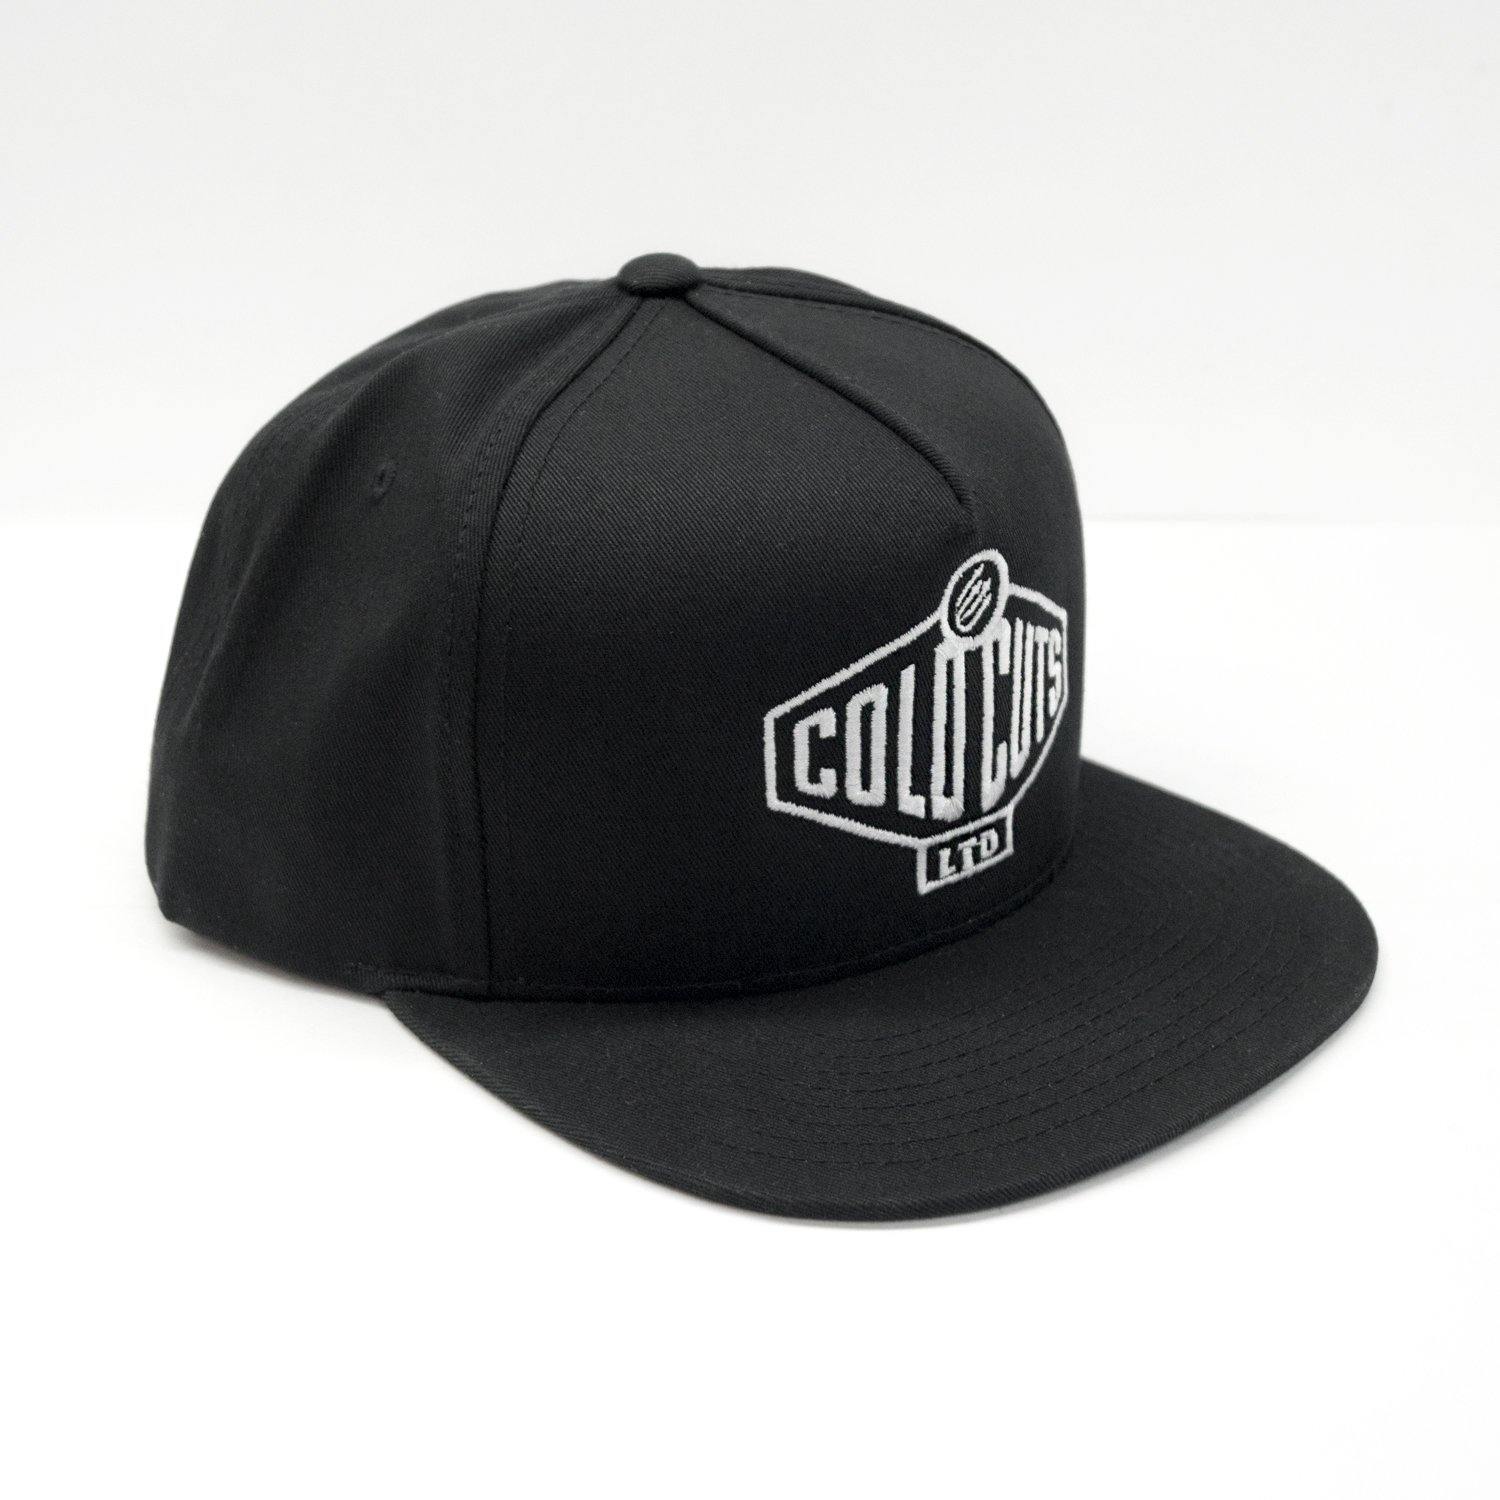 Buy – Boxed In 5-Panel Snapback – Cold Cuts Ltd